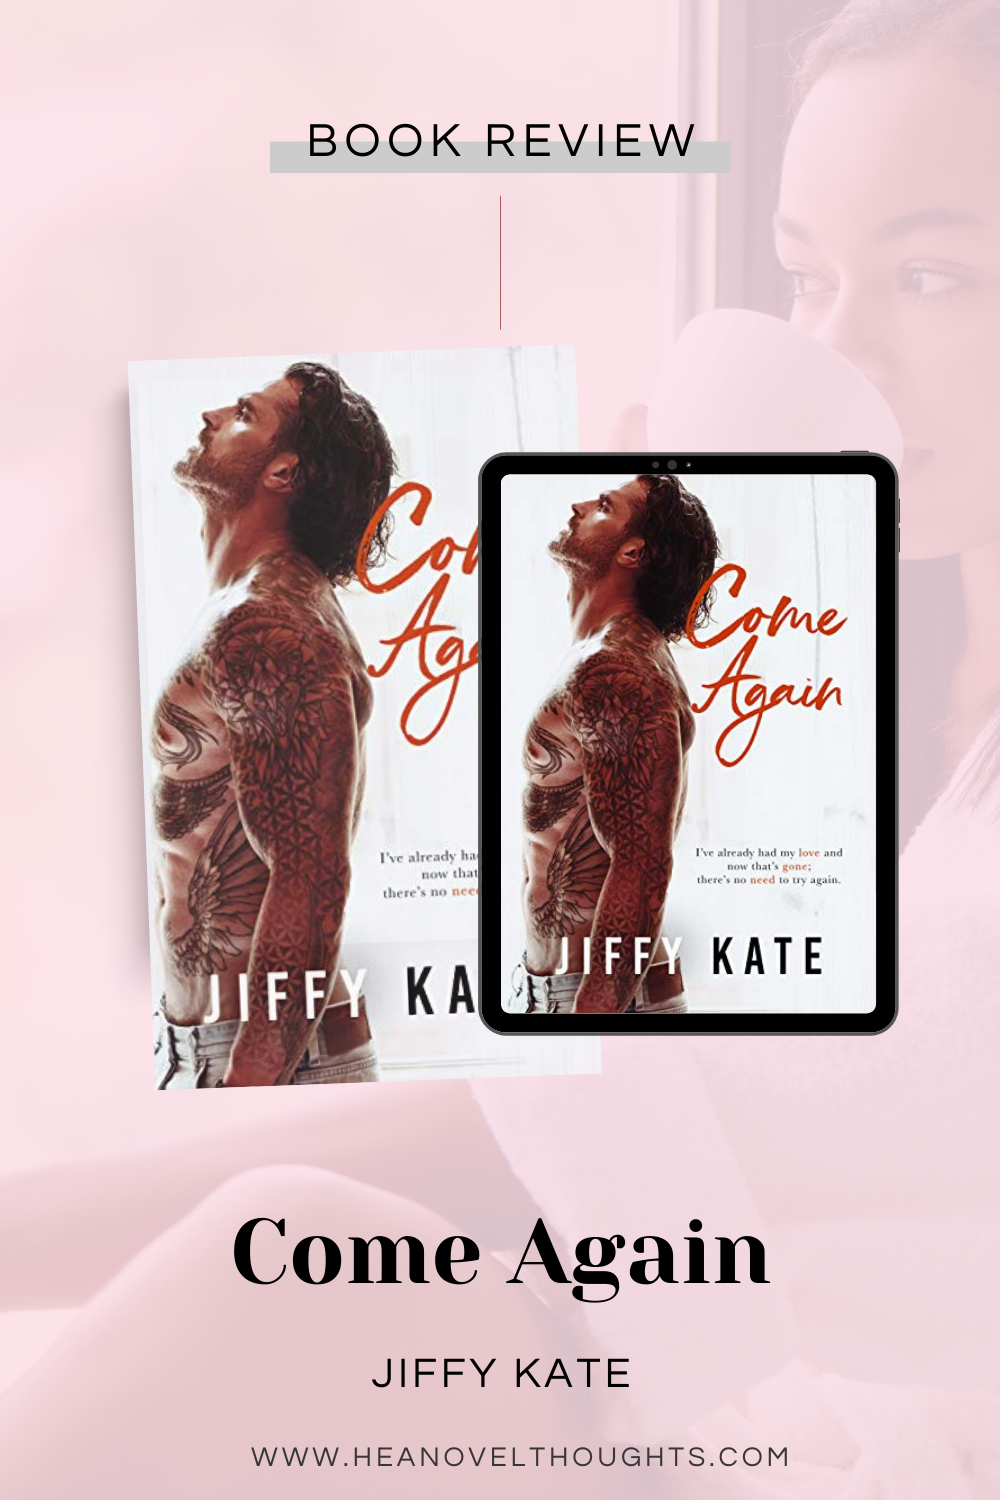 Come Again by Jiffy Kate